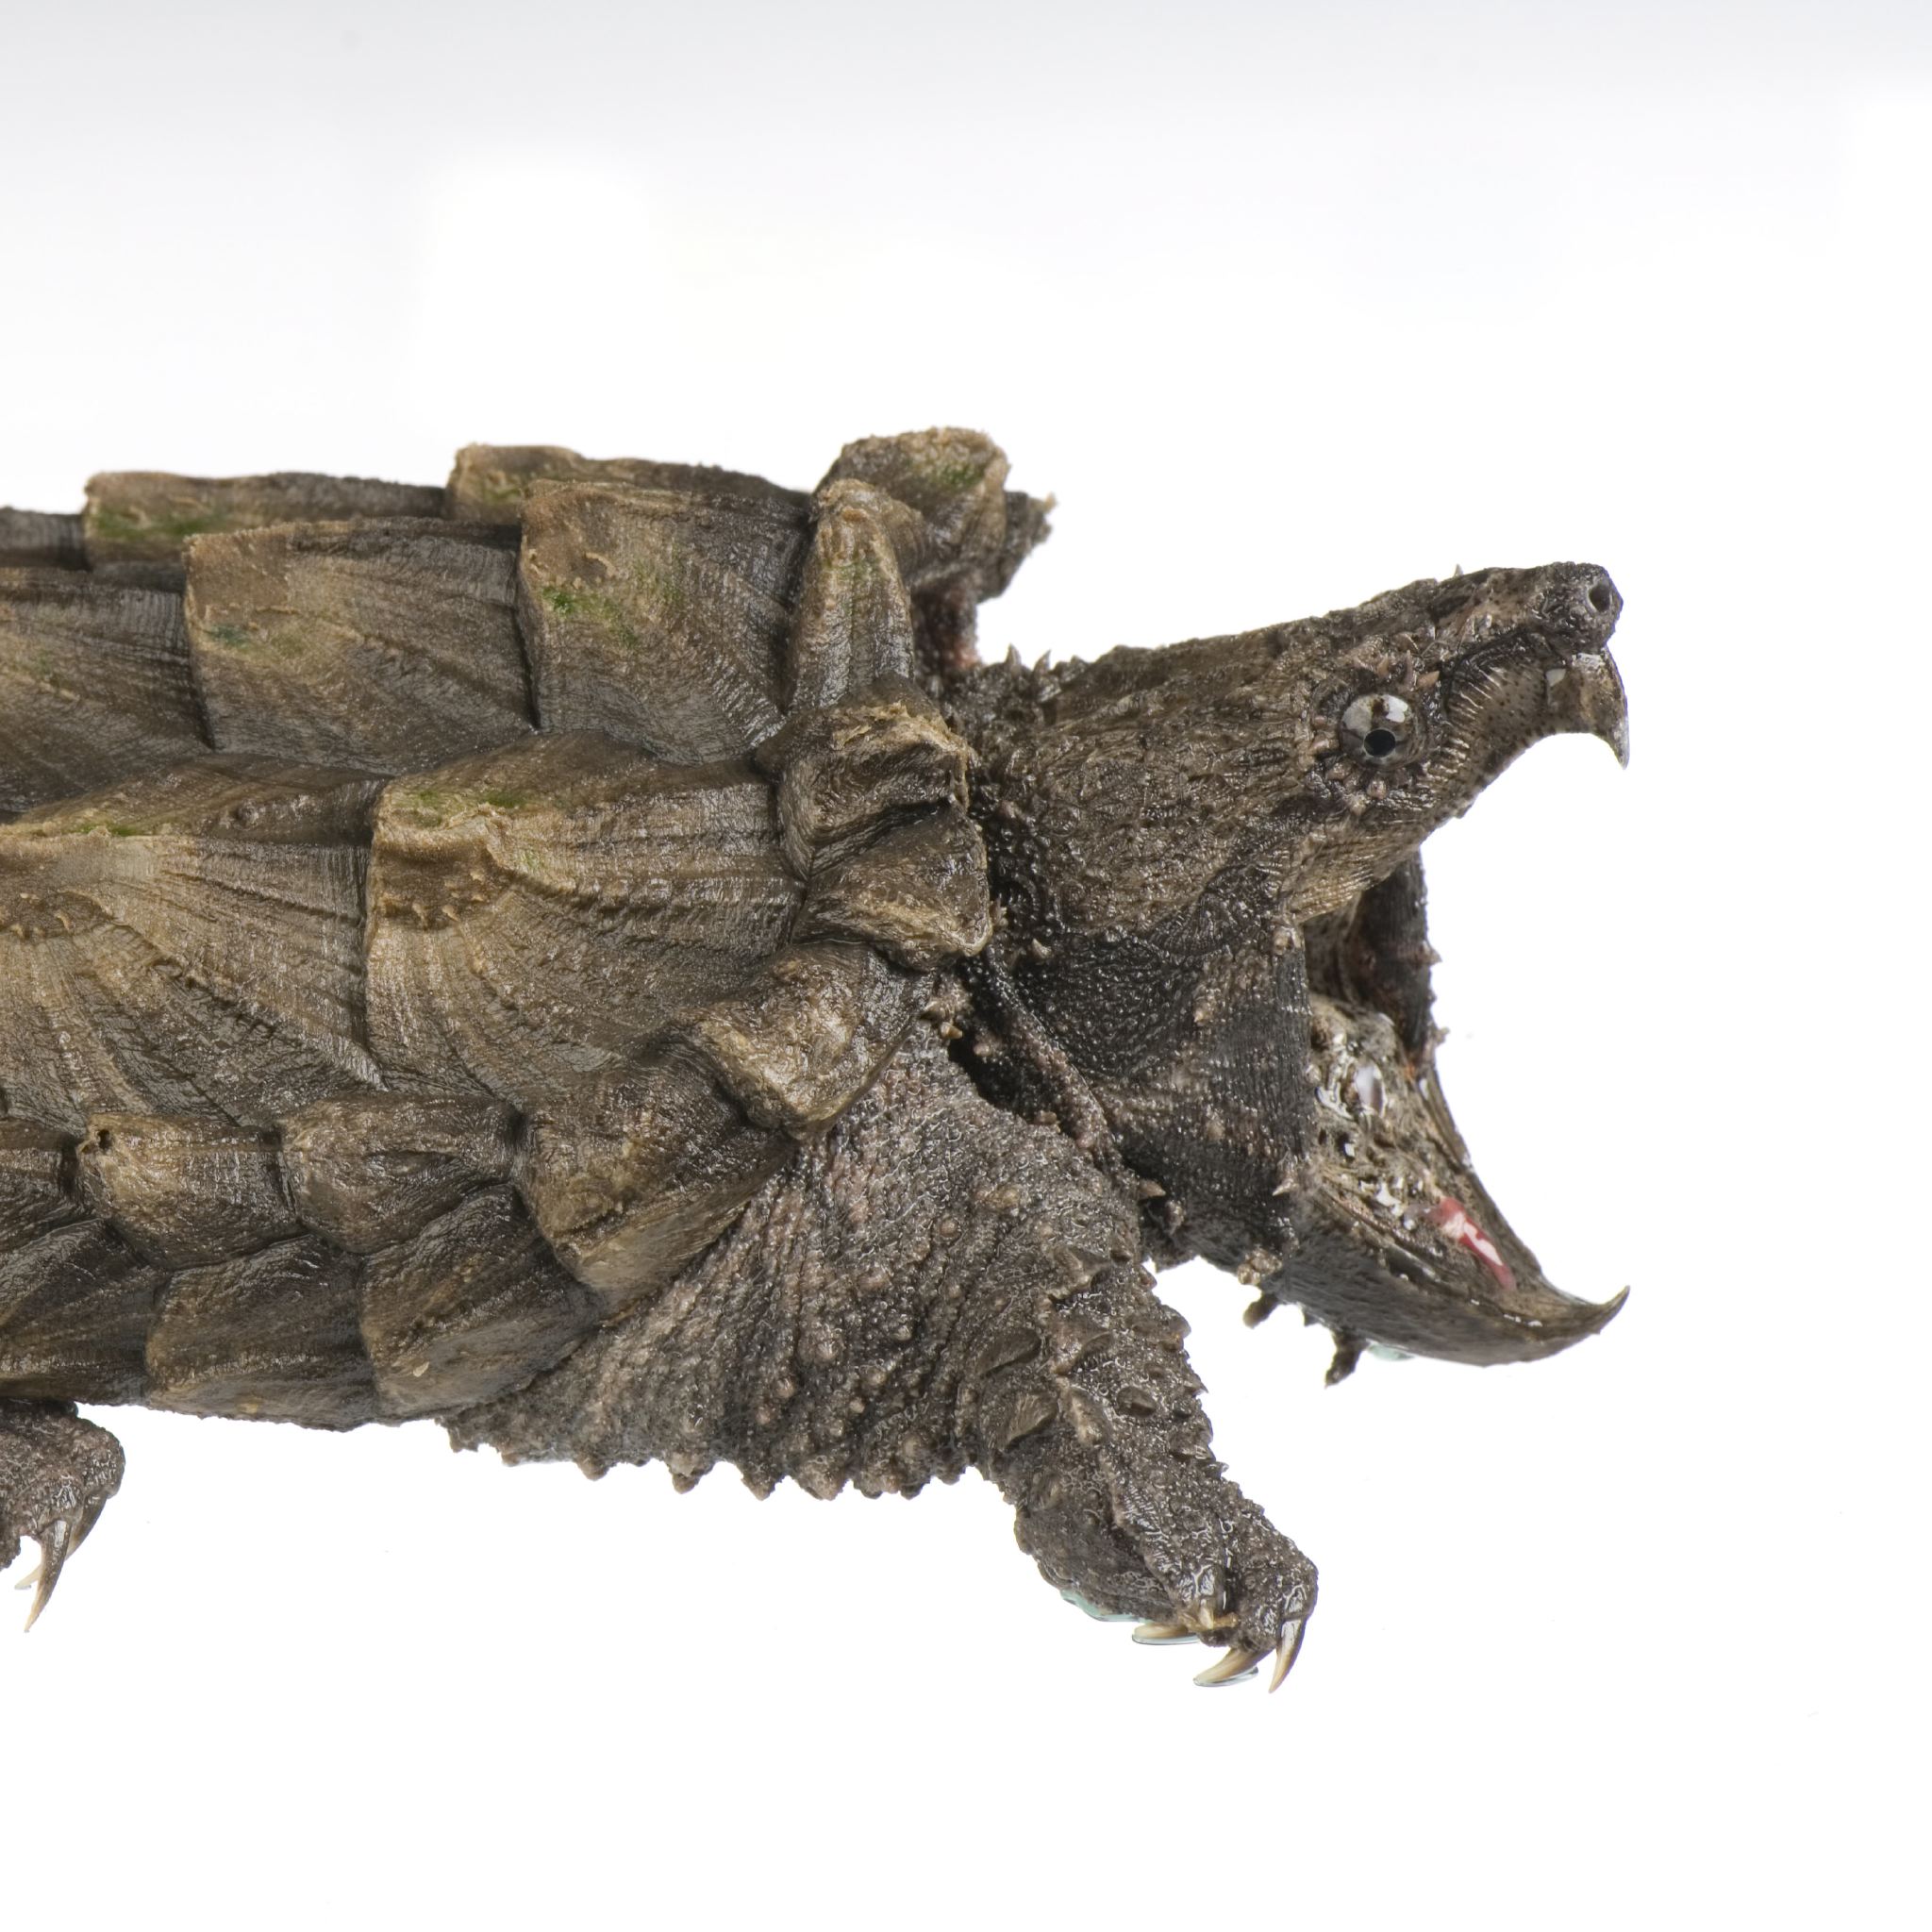 Alligator Snapping Turtle #1